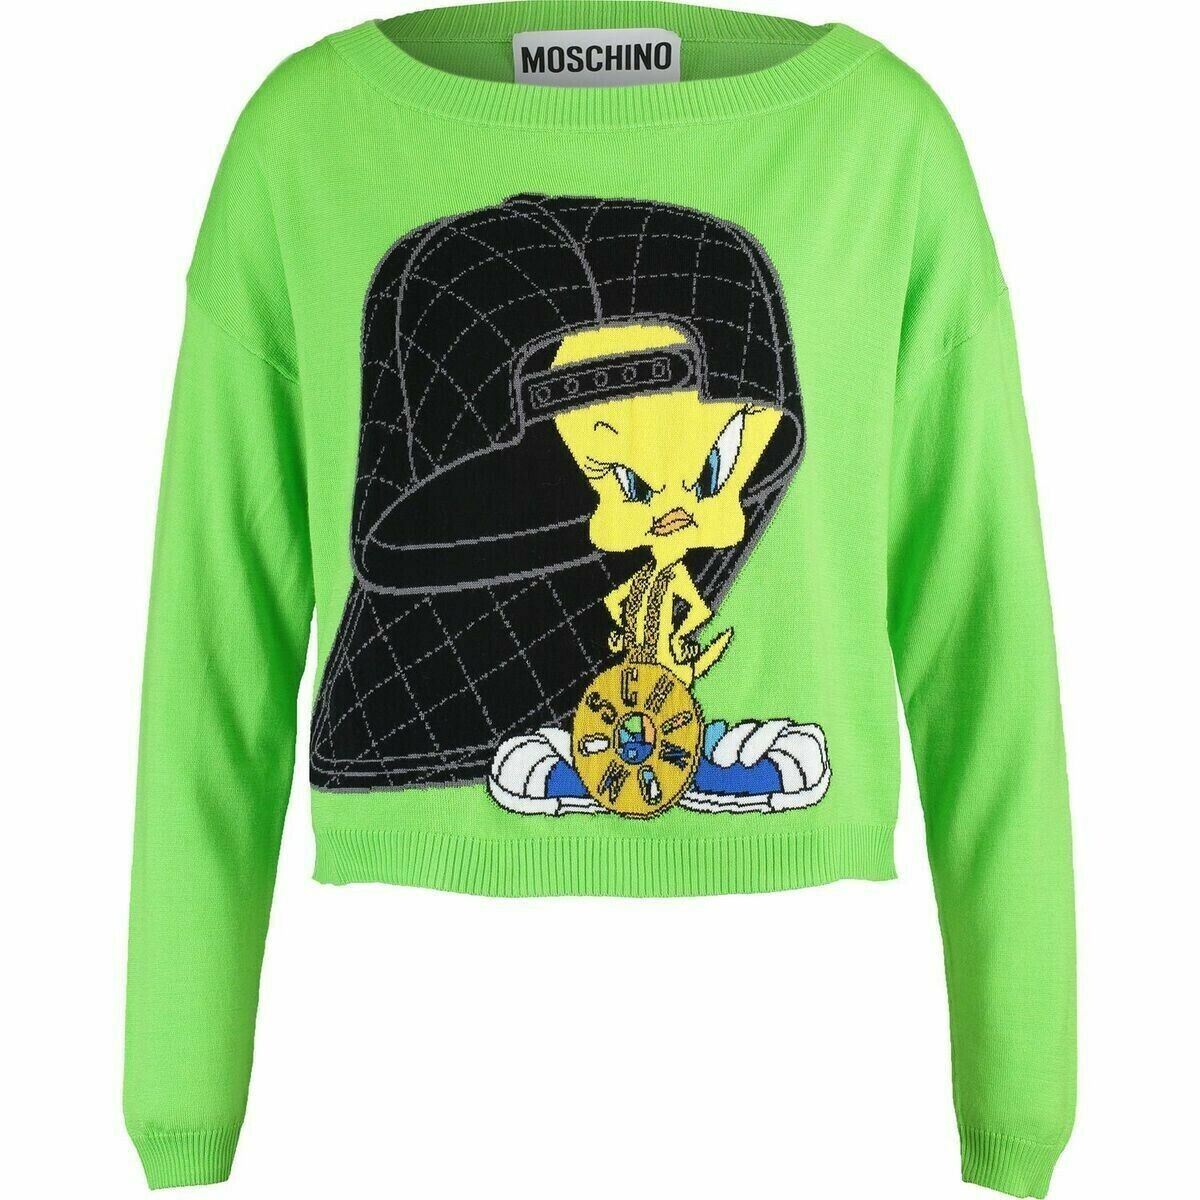 MOSCHINO COUTURE Women's TWEETY Cropped Jumper by Jeremy Scott, size UK 12